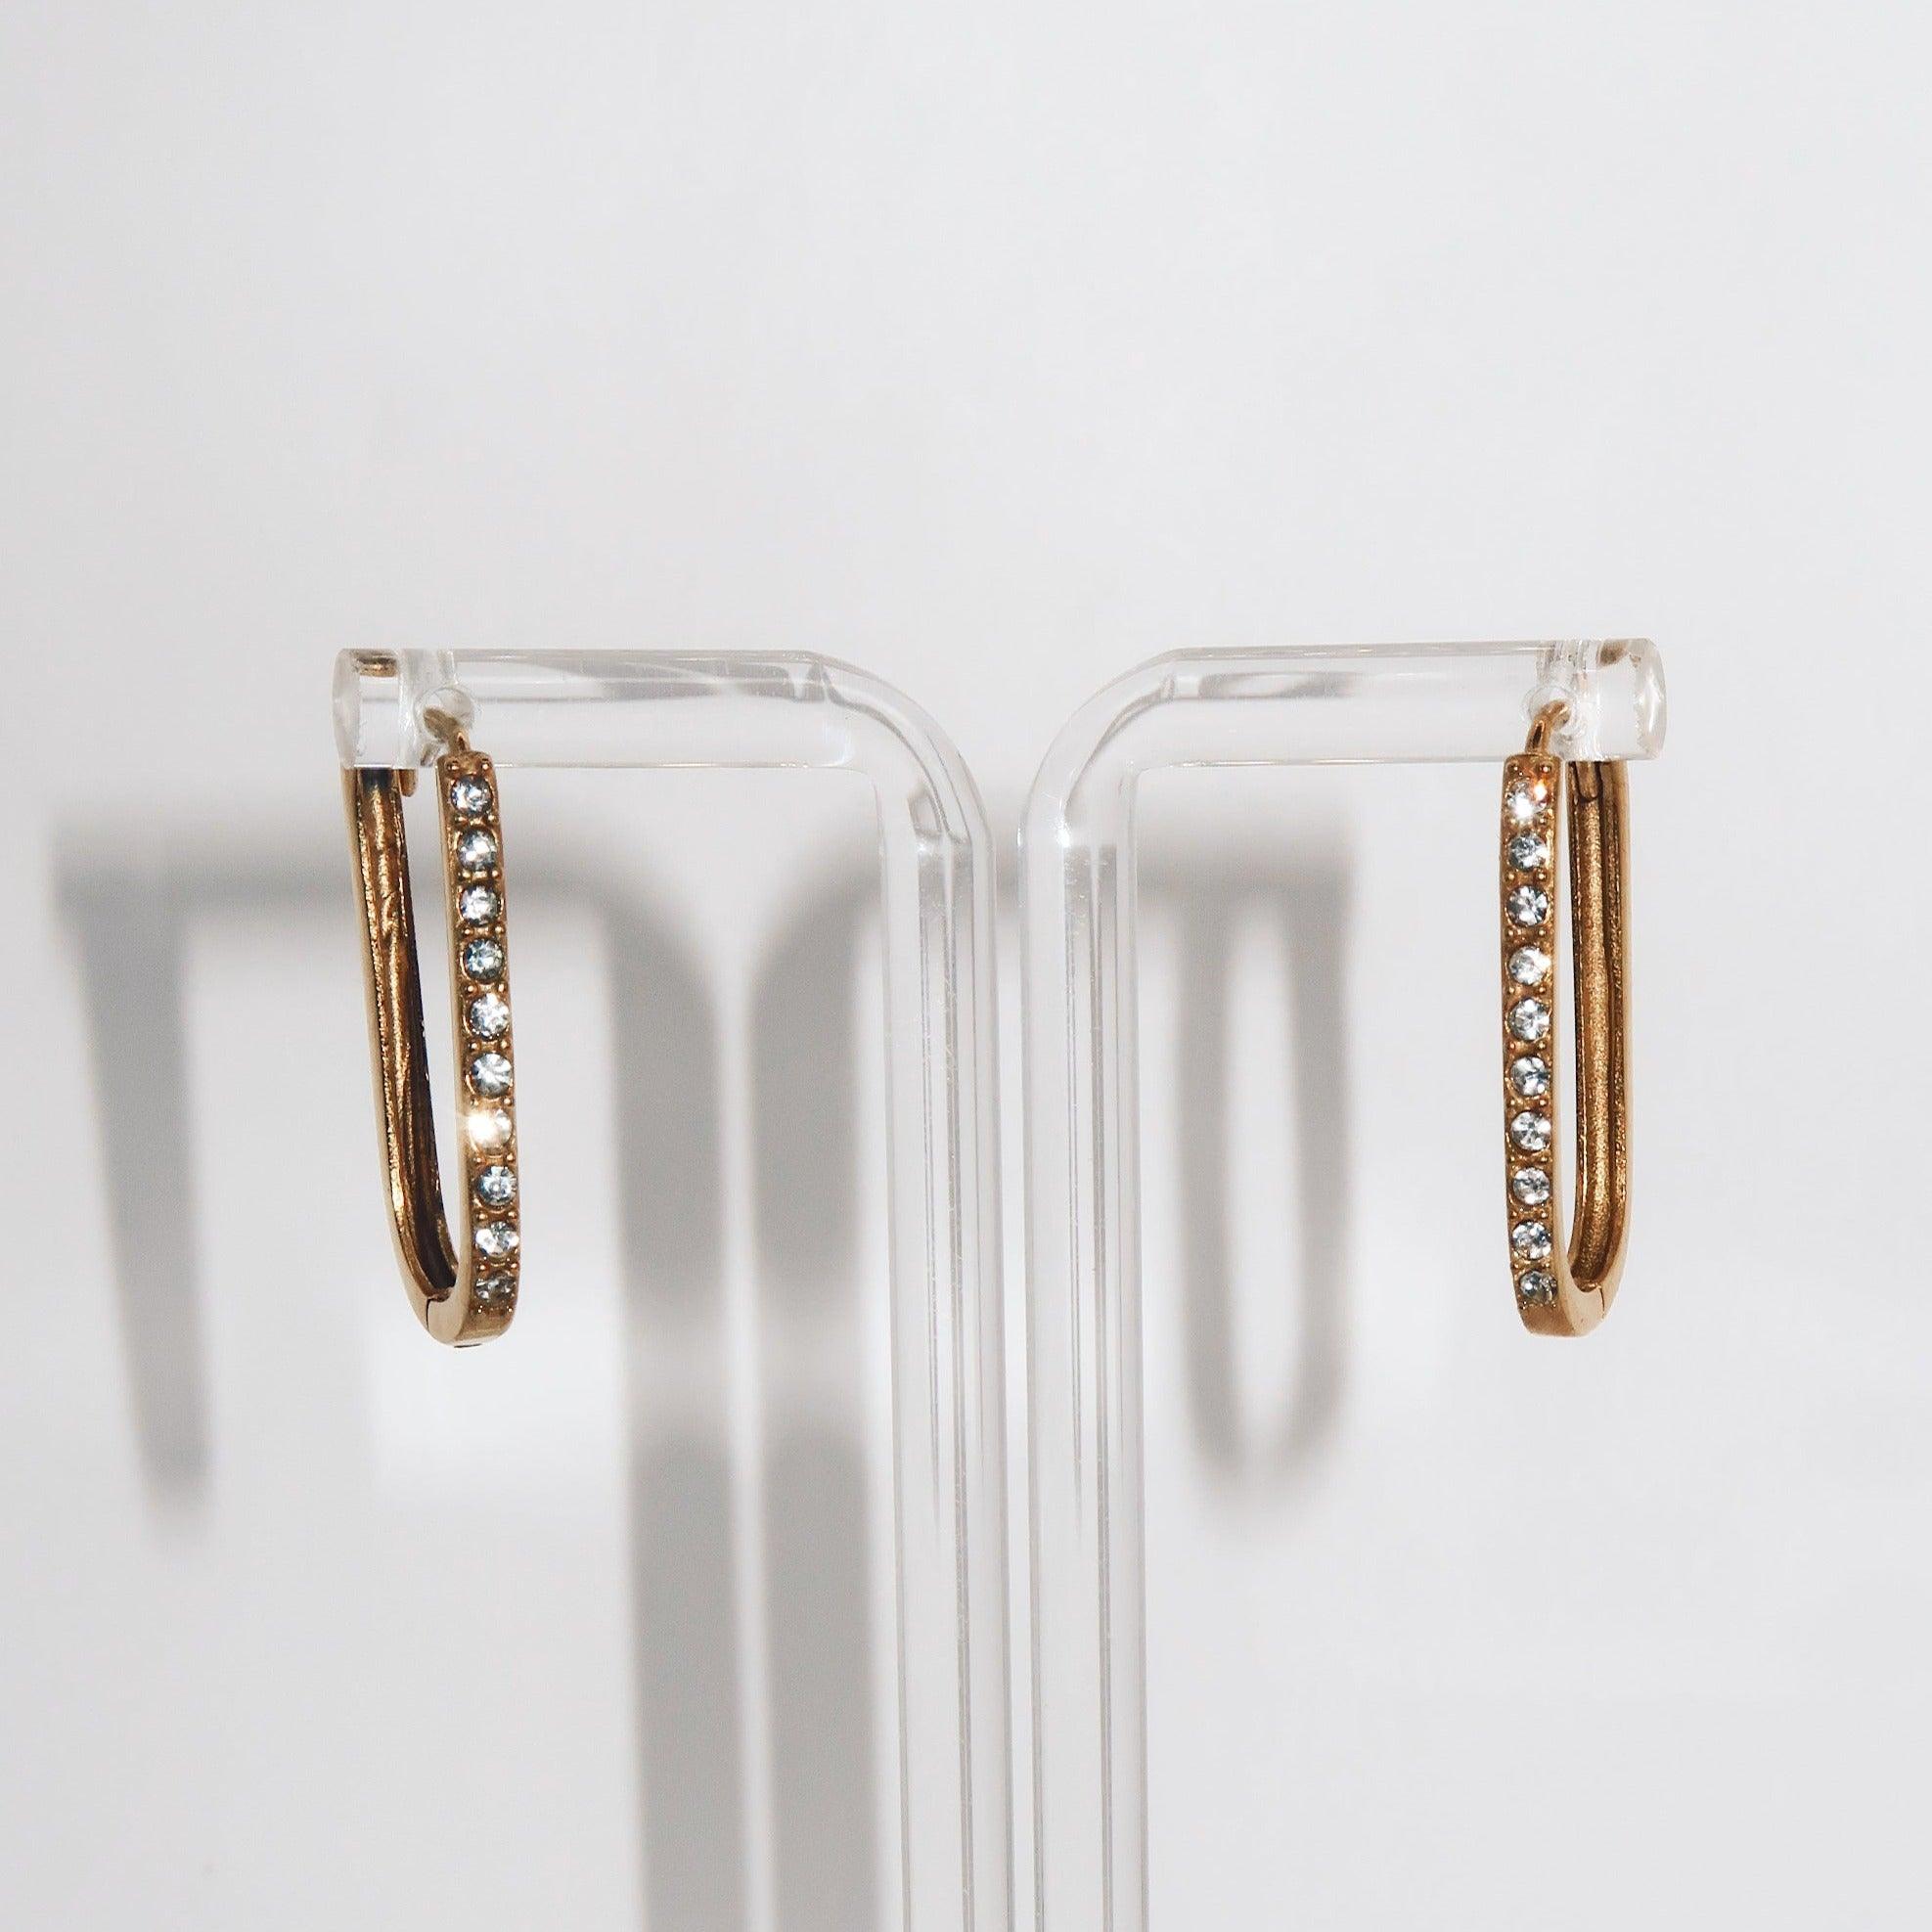 LANA - 18K PVD Gold Plated U-Shaped Hoop Earrings with CZ Stones - Mixed Metals